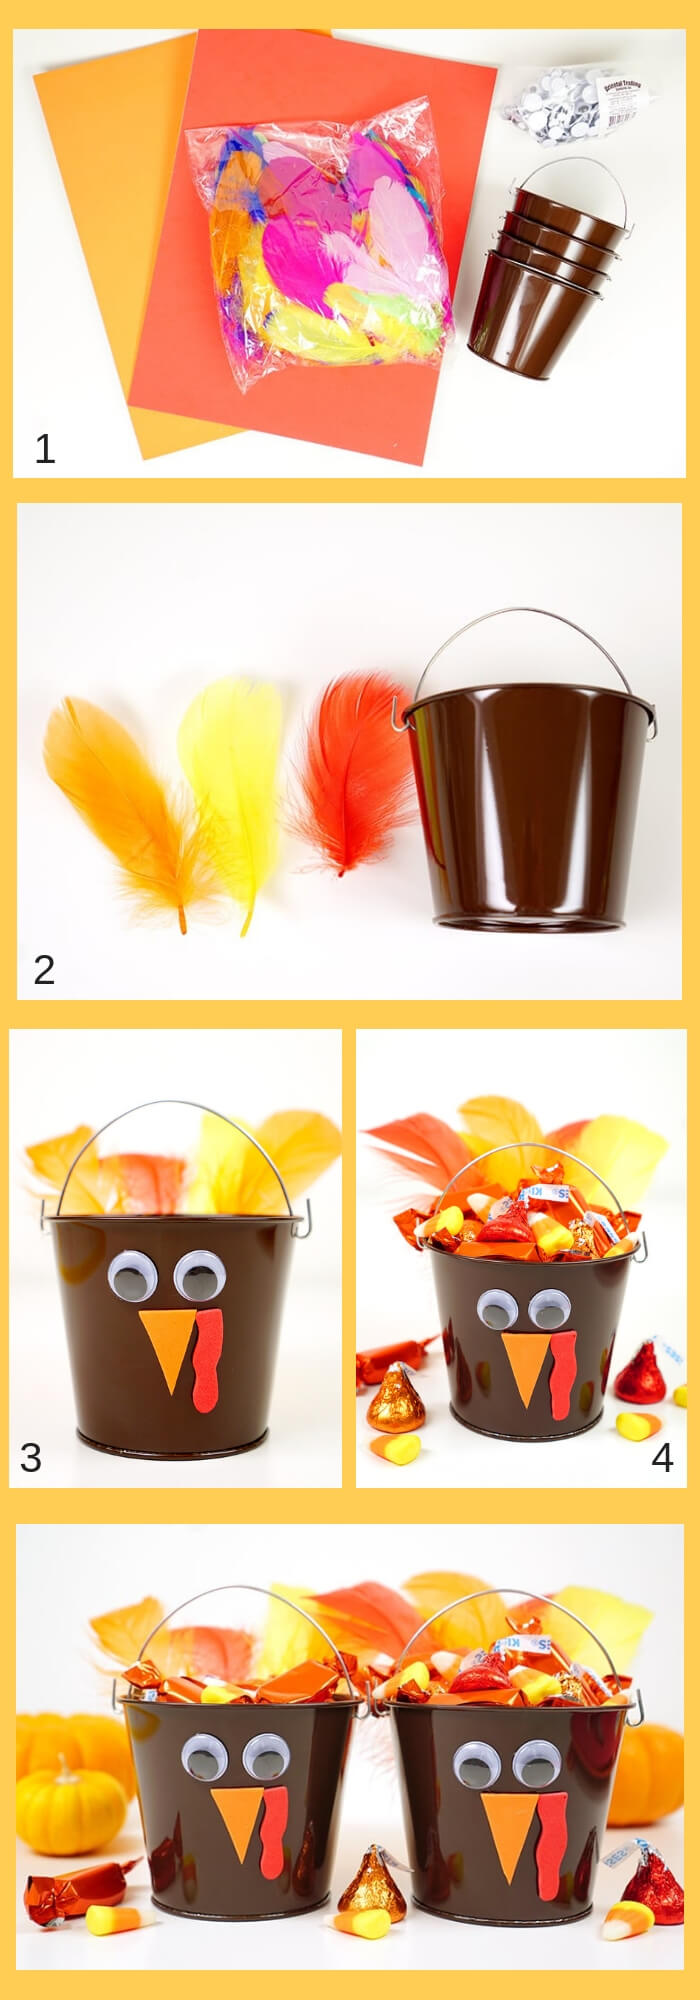 Turkey Treat Buckets | Simple Ideas for Kids' Crafts for Thanksgiving - FarmFoodFamily.com